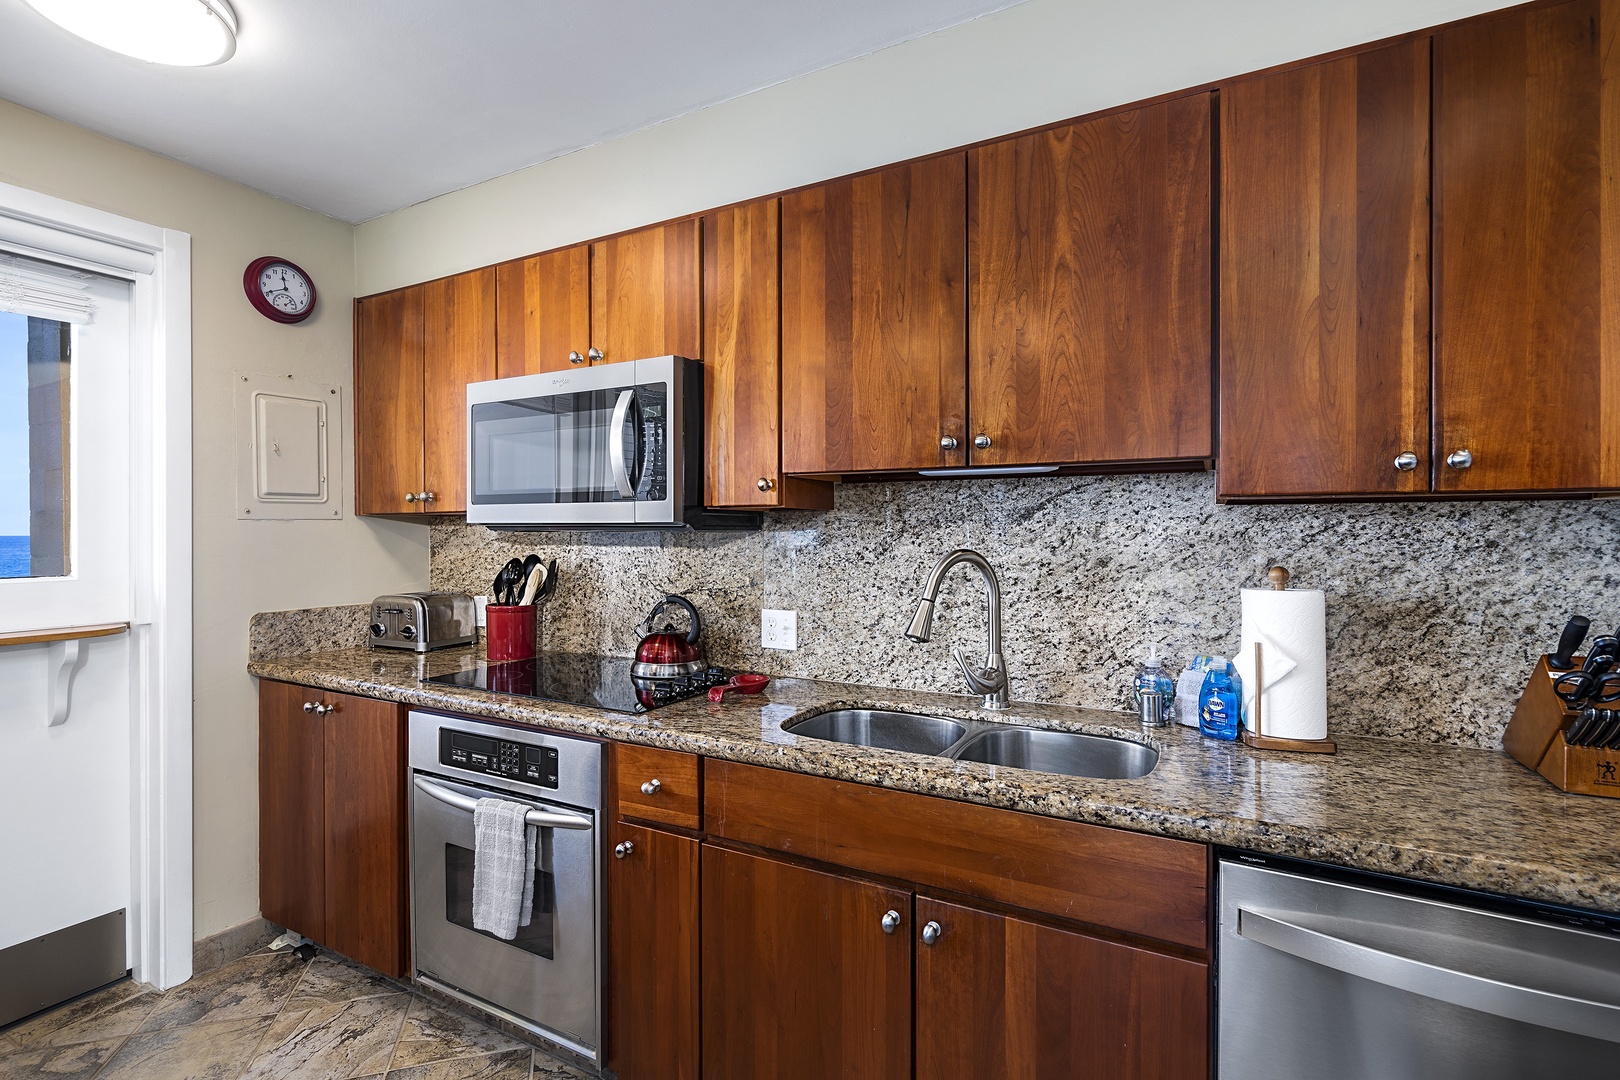 Kailua Kona Vacation Rentals, Kona Makai 6201 - Updated kitchen with all the essentials to prepare your favorite meals